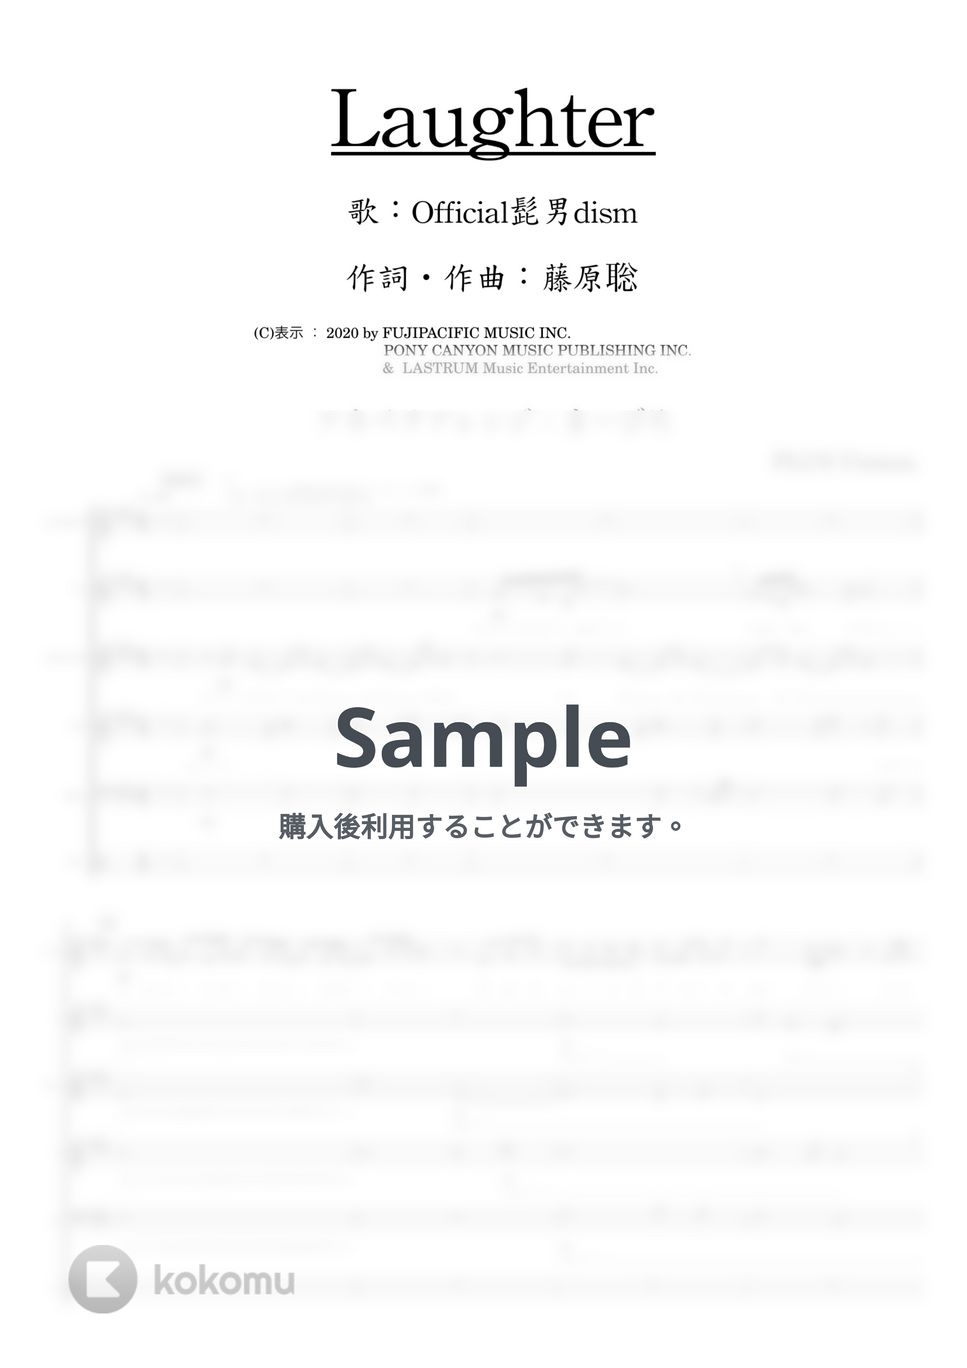 Official髭男dism - Laughter (アカペラ楽譜,pdf+muse(zip)セット) by まーびーショップ